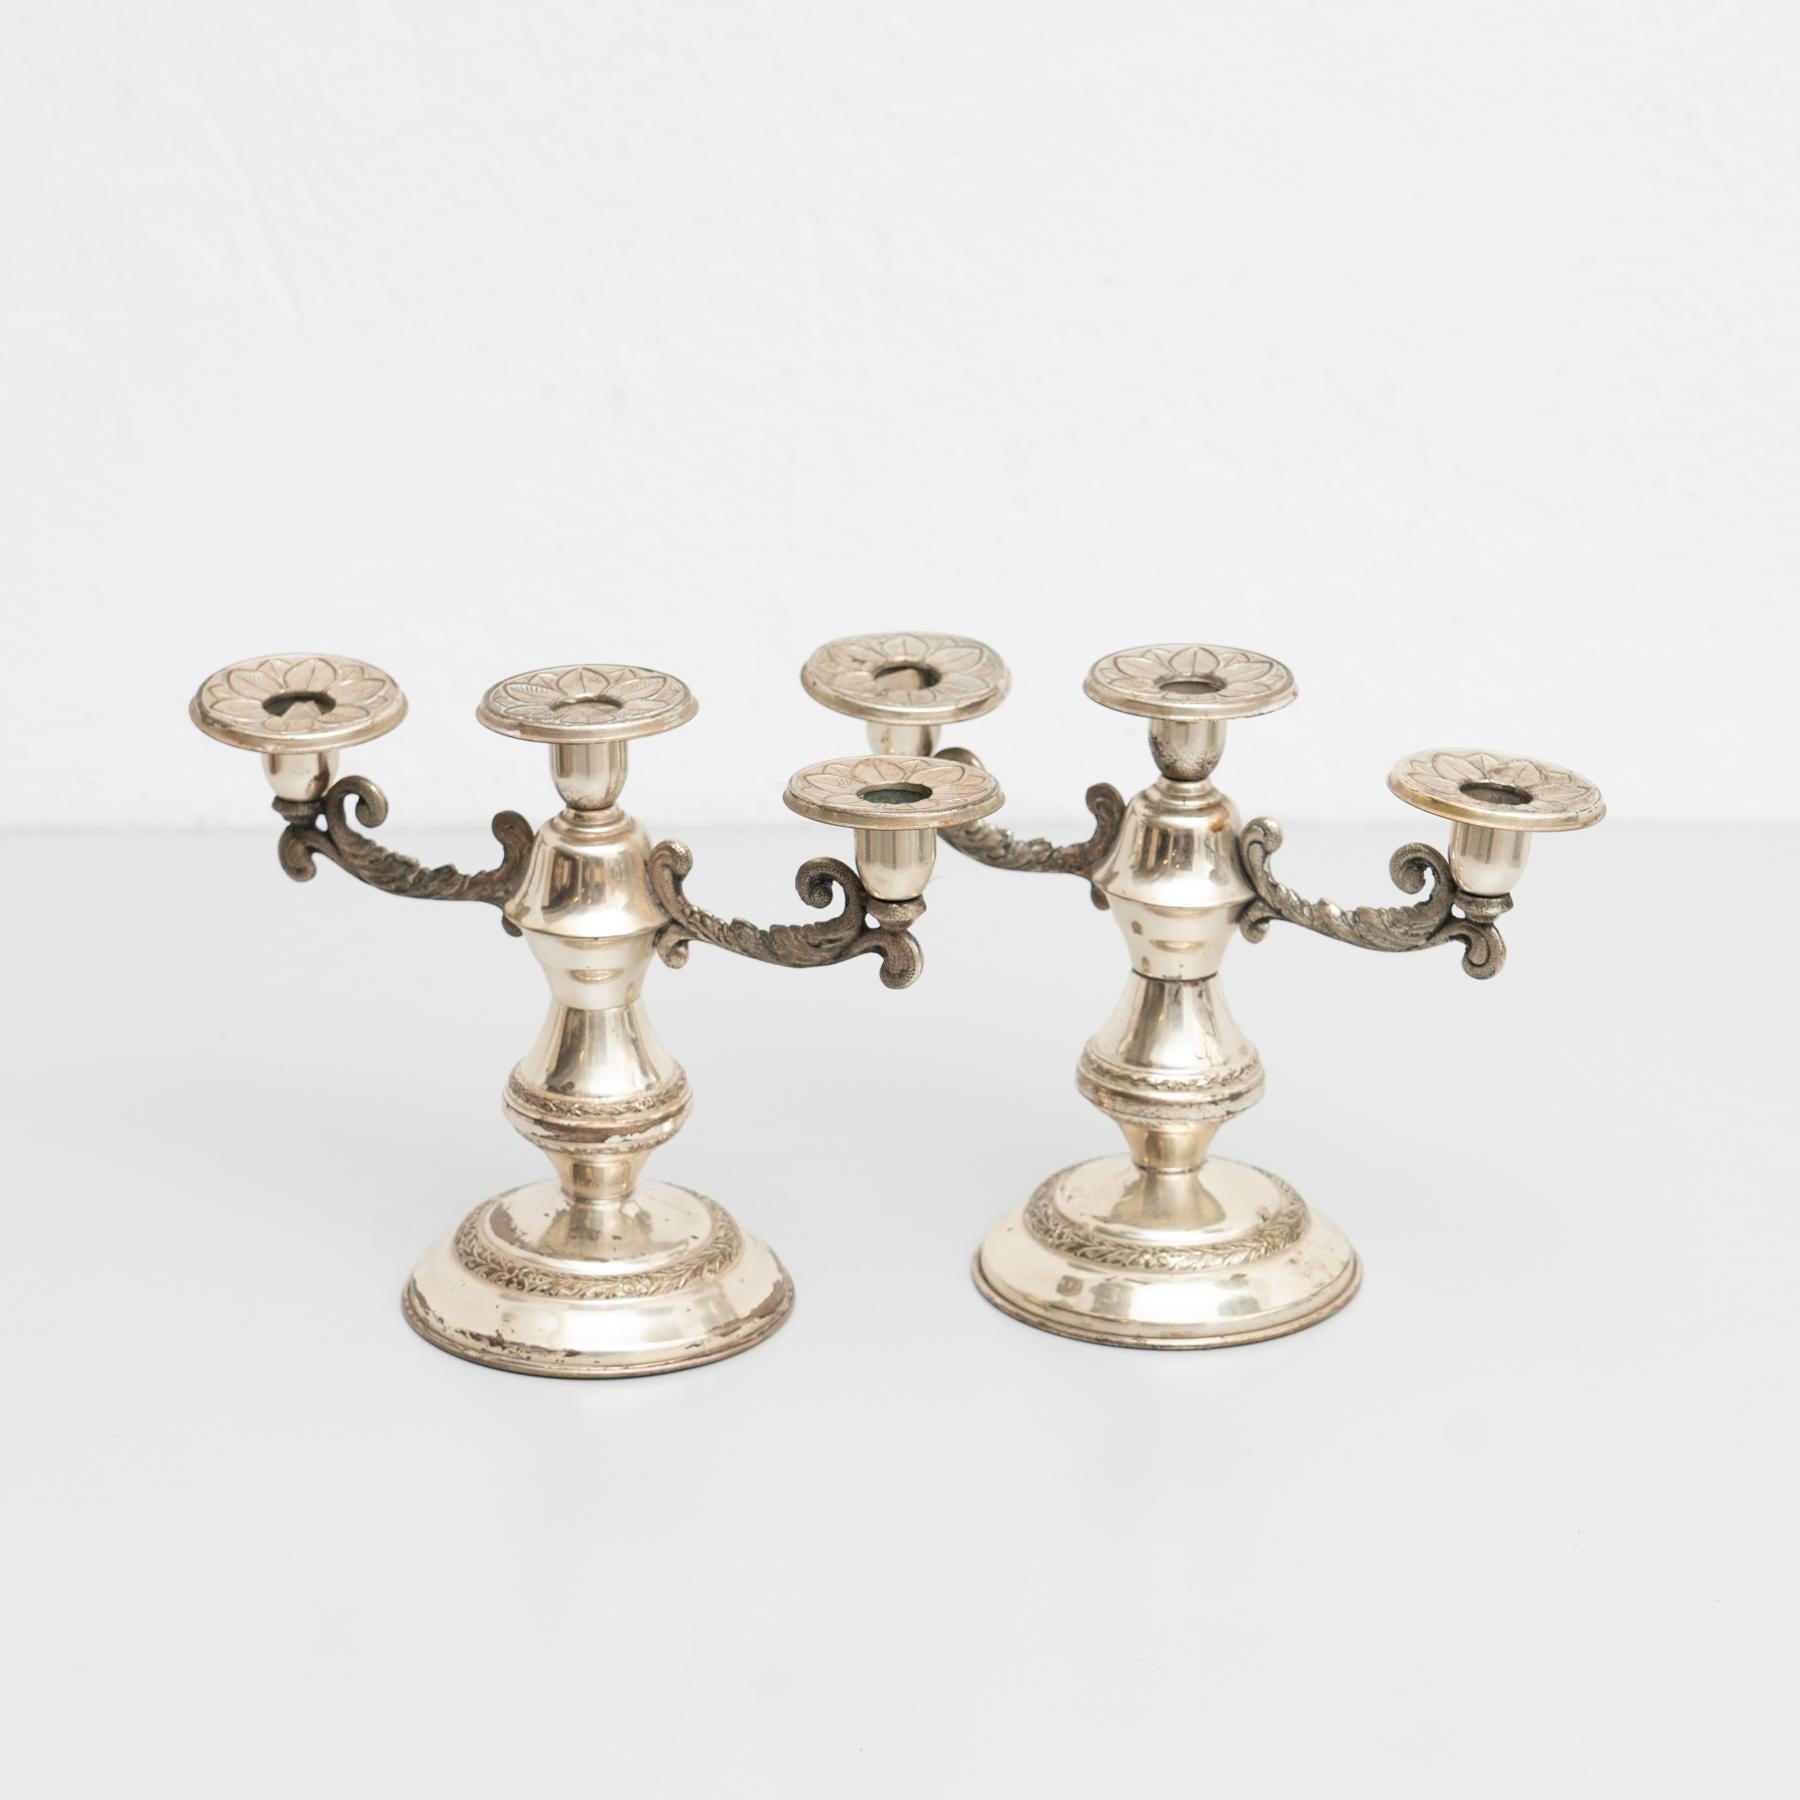 Set of 2 antique metal candle holders, circa 1950
By unknown manufacturer. Spain

In original condition, with minor wear consistent with age and use, preserving a beautiful patina.
  
Material:
Metal.

